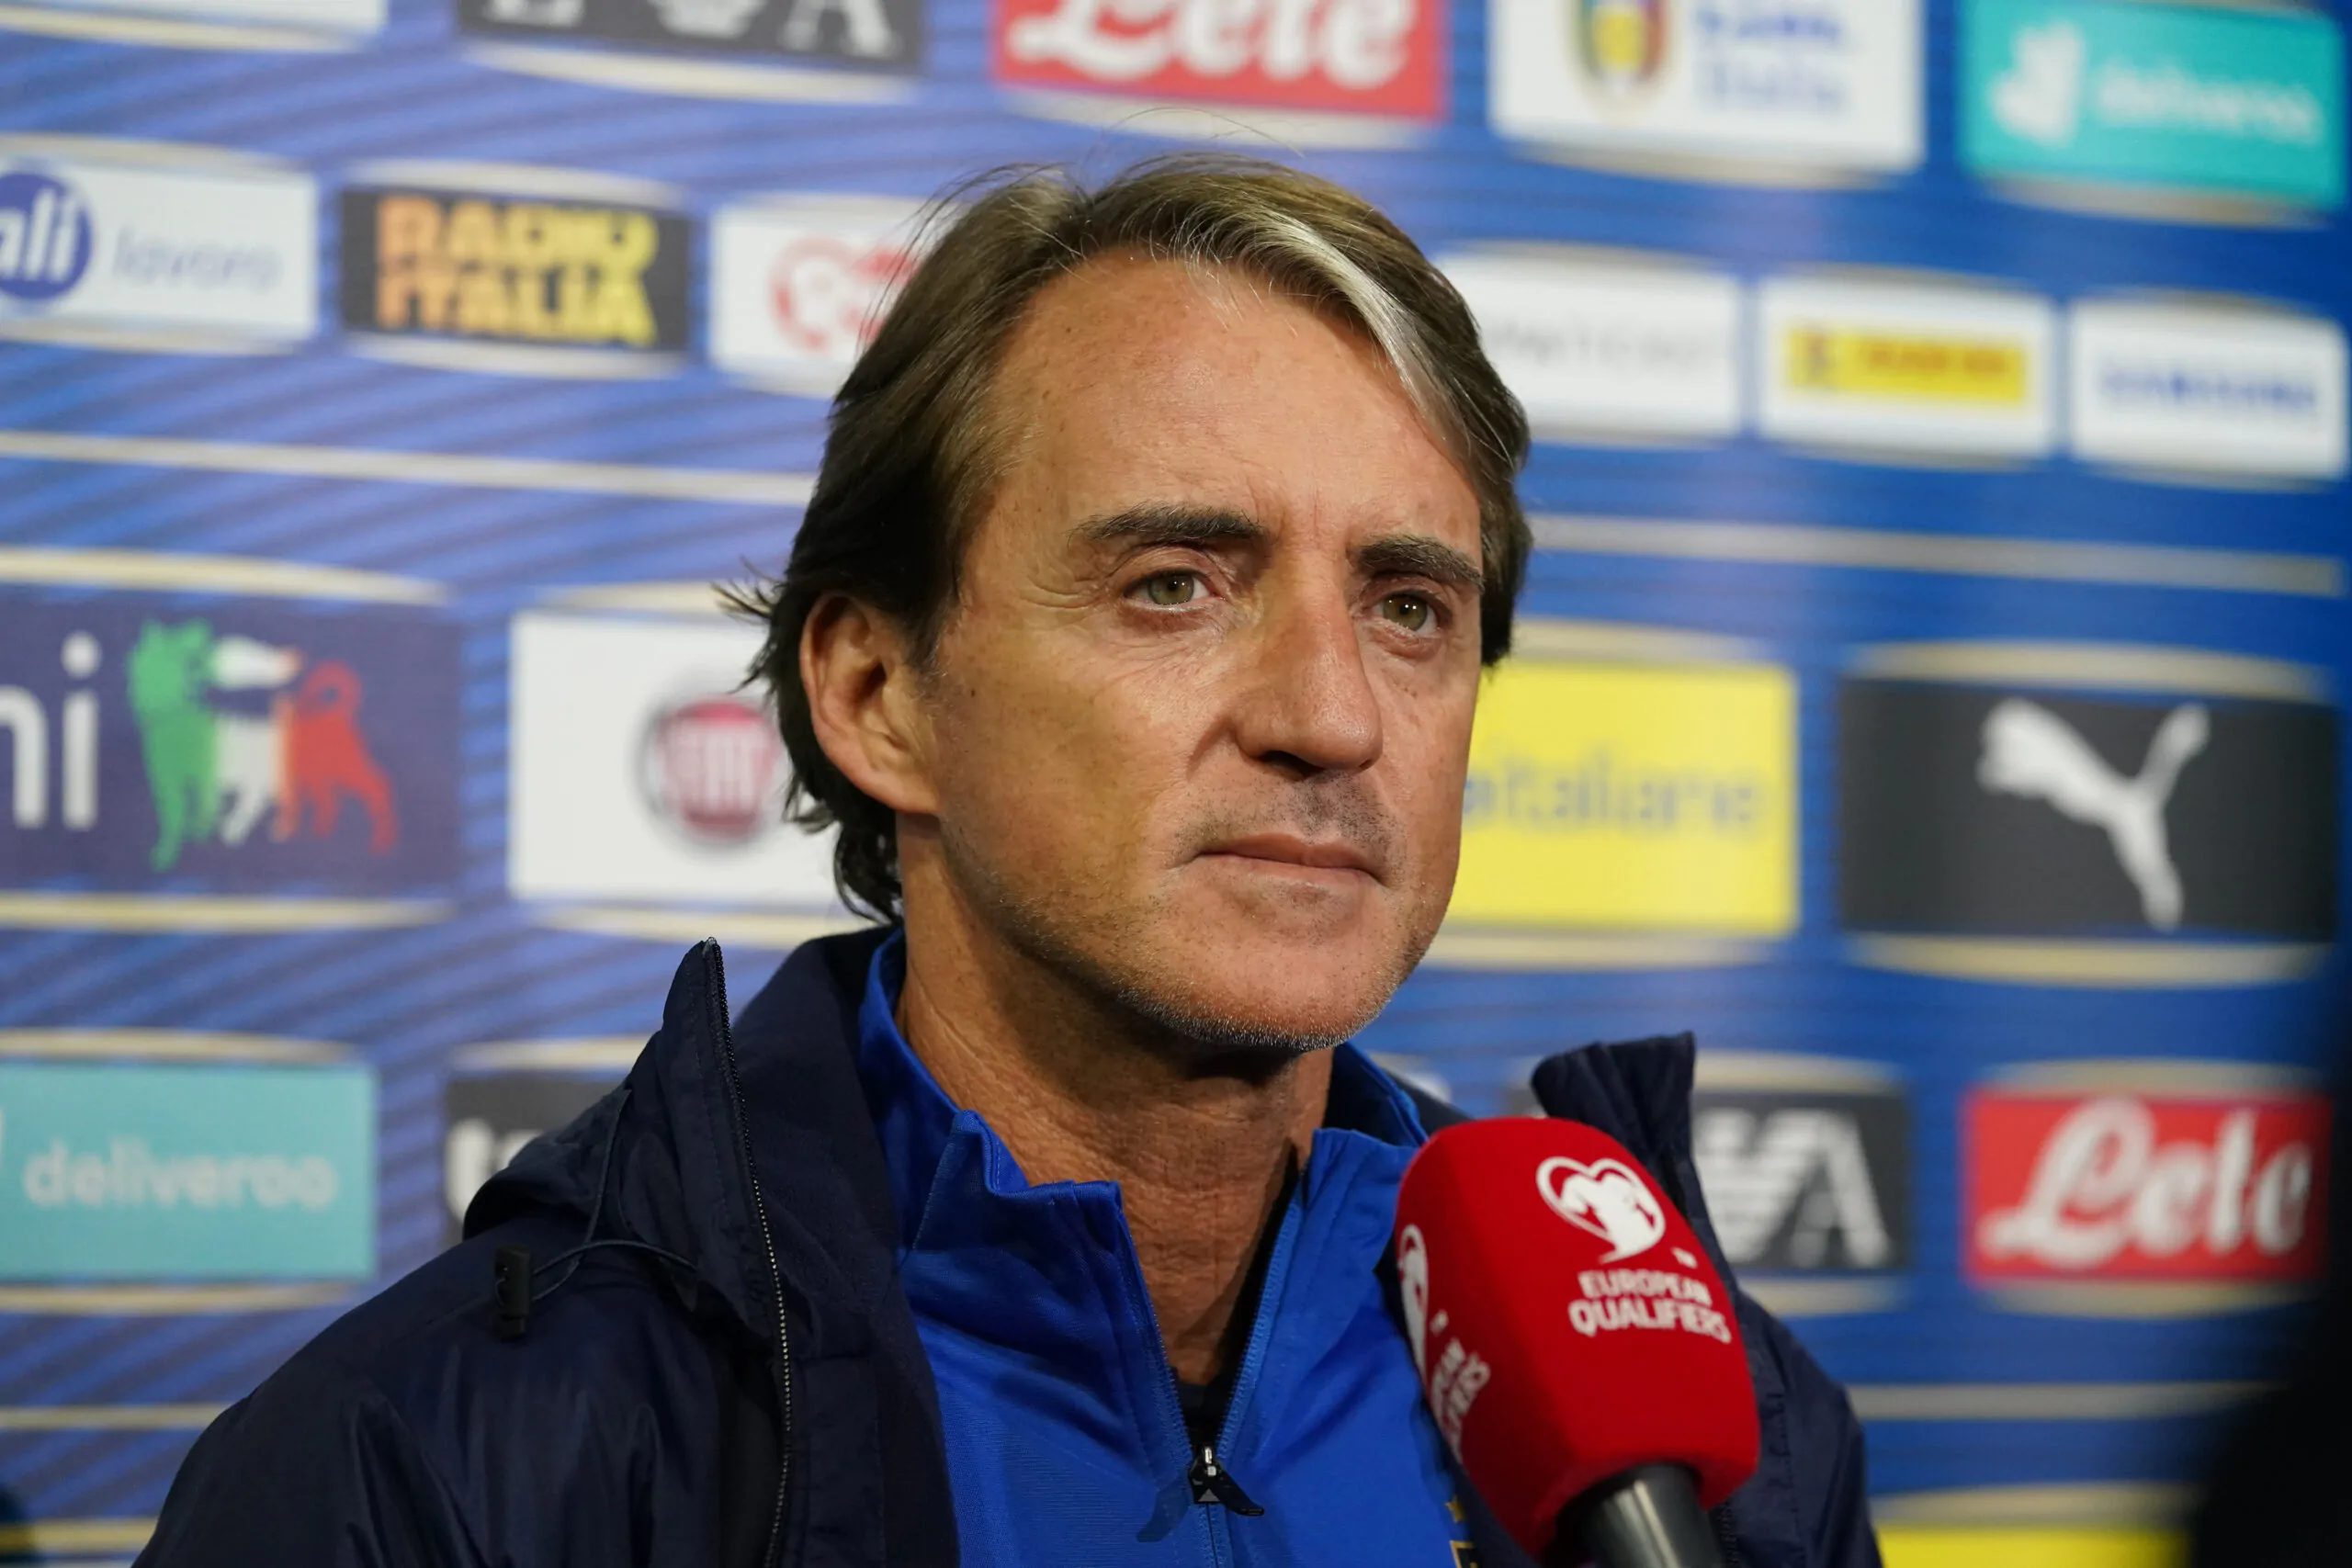 Roberto Mancini admitted that advancing to the final four of the Nations League doesn’t make up for missing out on the 2022 World Cup.